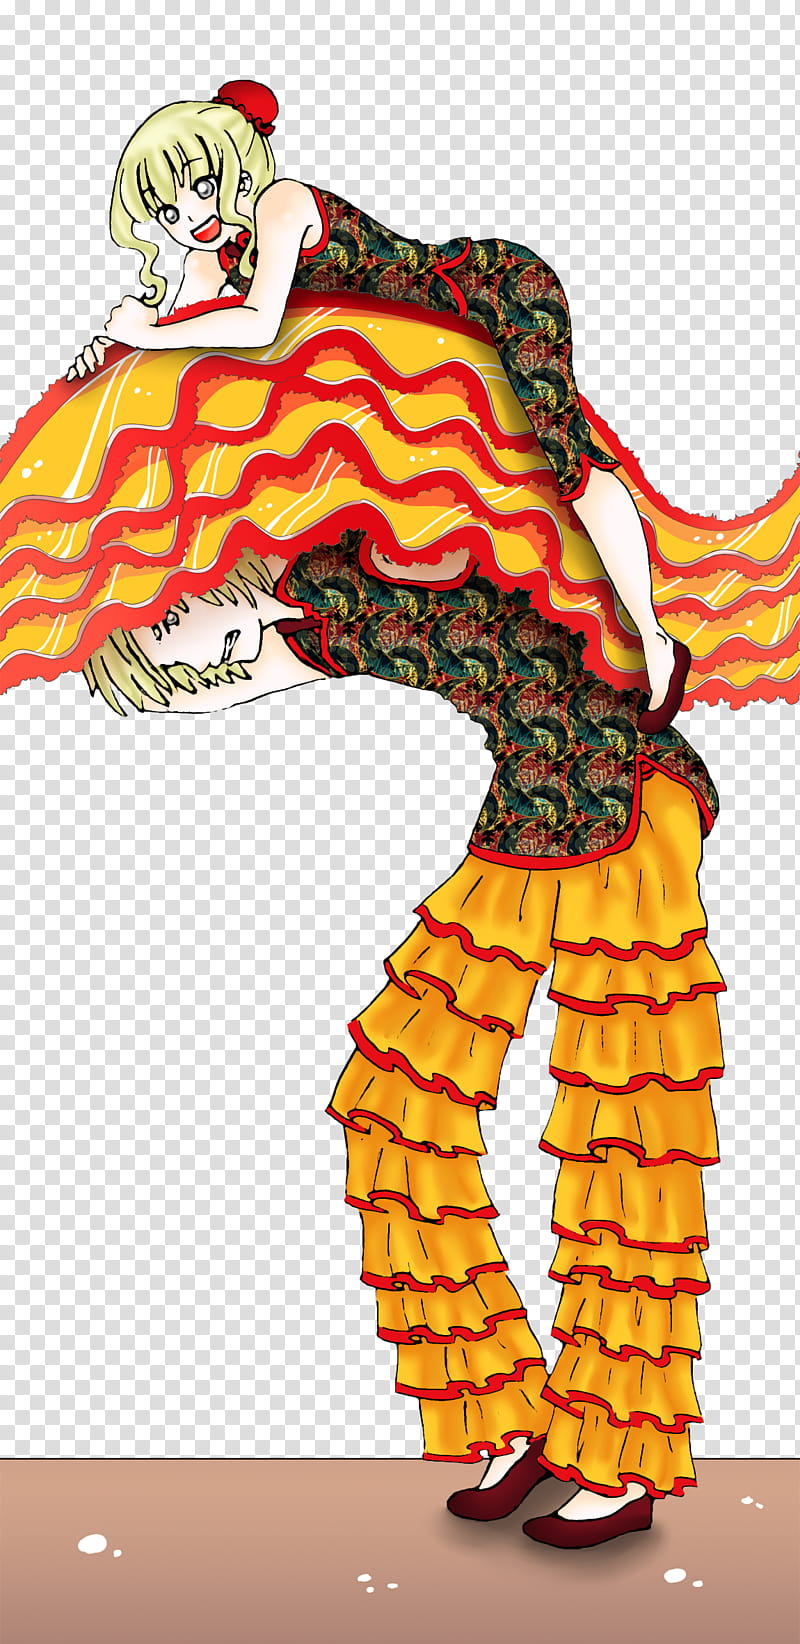 CR Collab Feb Barongsai, woman on man's back wearing black and green top illustration transparent background PNG clipart